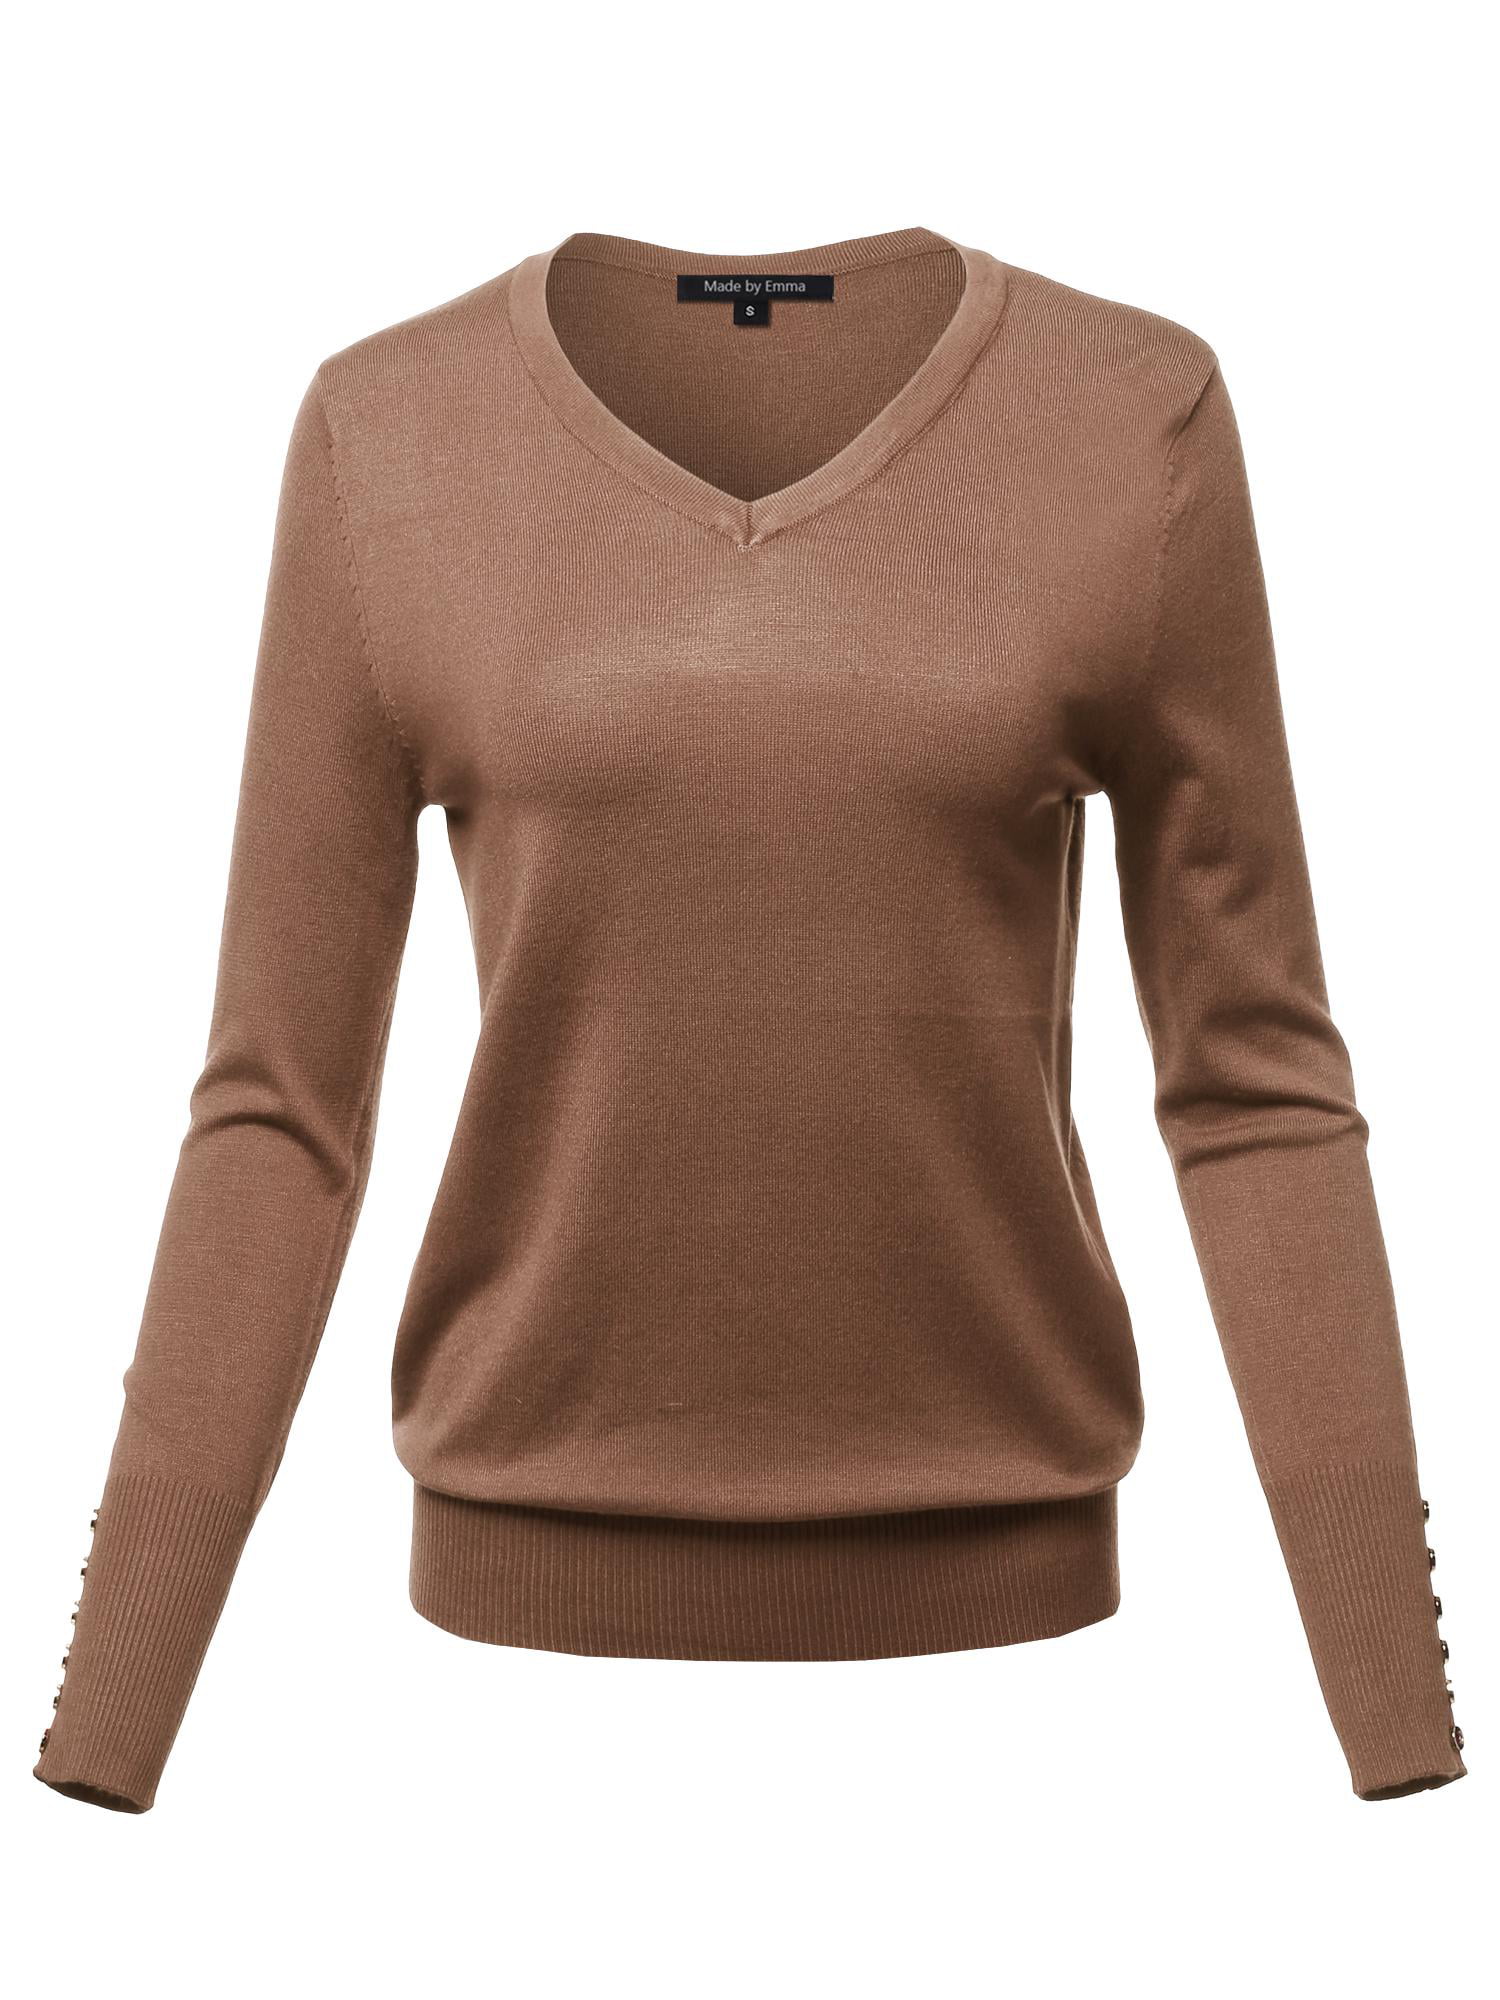 FashionOutfit Women's Casual Premium Quality Gold Button Stretchy V-Neck Sweater 